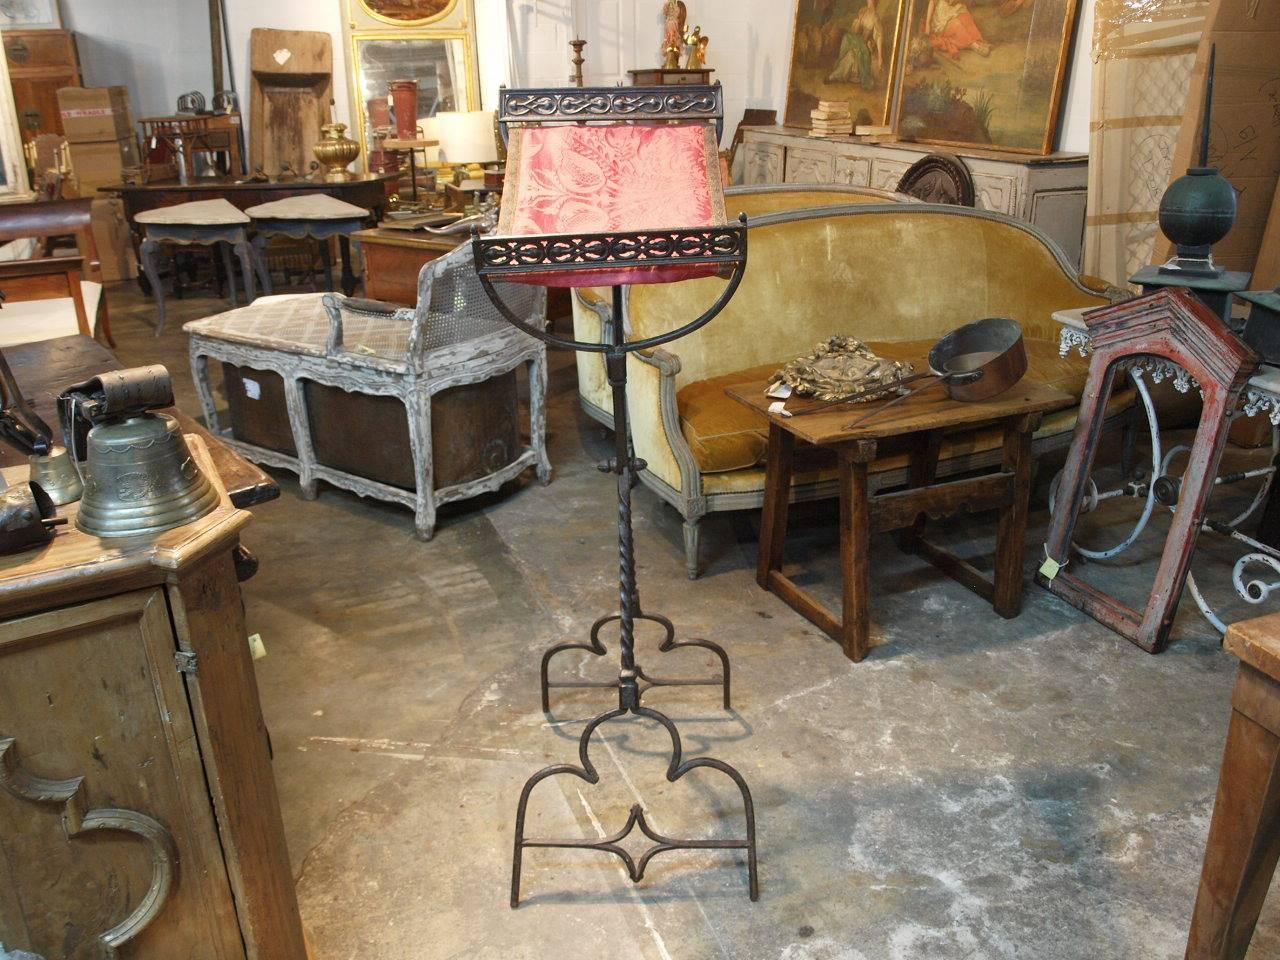 An outstanding 17th century Lutrin, Bible stand, book stand from the South of France. Expertly crafted in hand-forged iron. A stunning piece not only to display a Bible from, but a small painting as well.